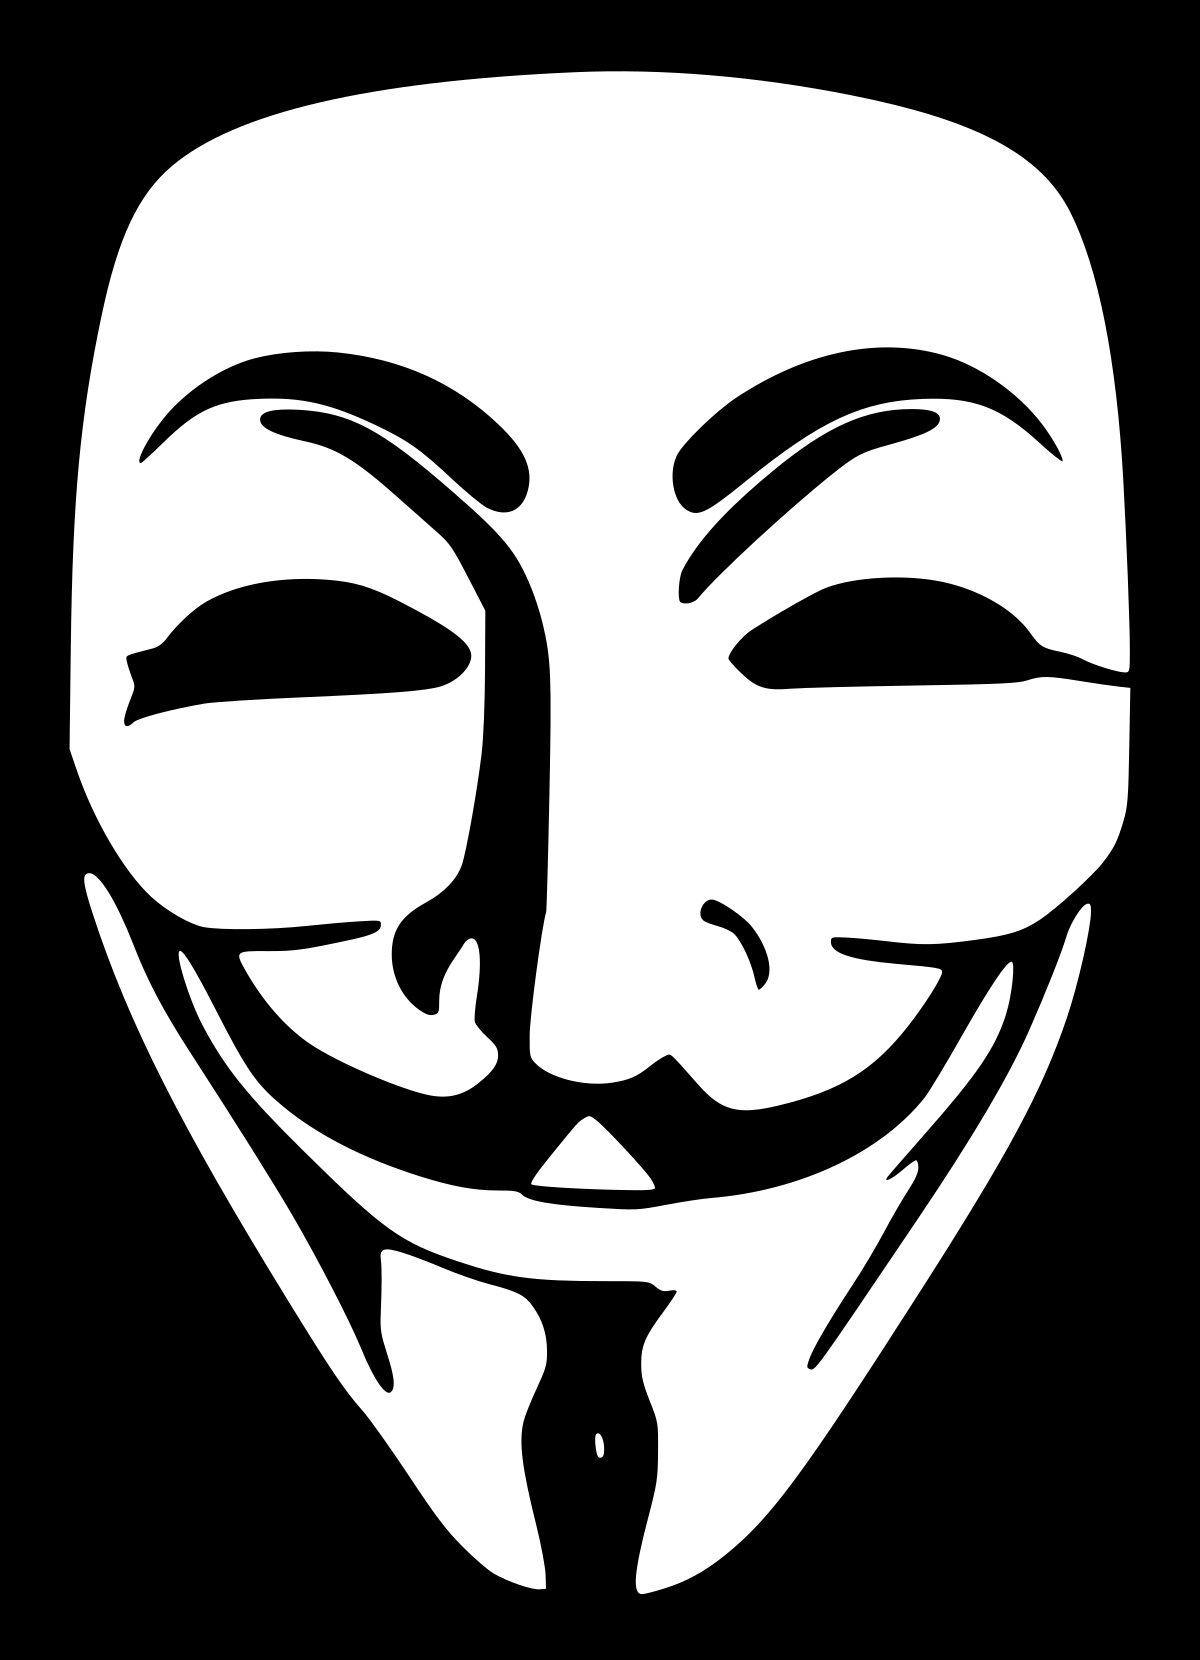 File:Anonymous.svg - Wikimedia Commons.